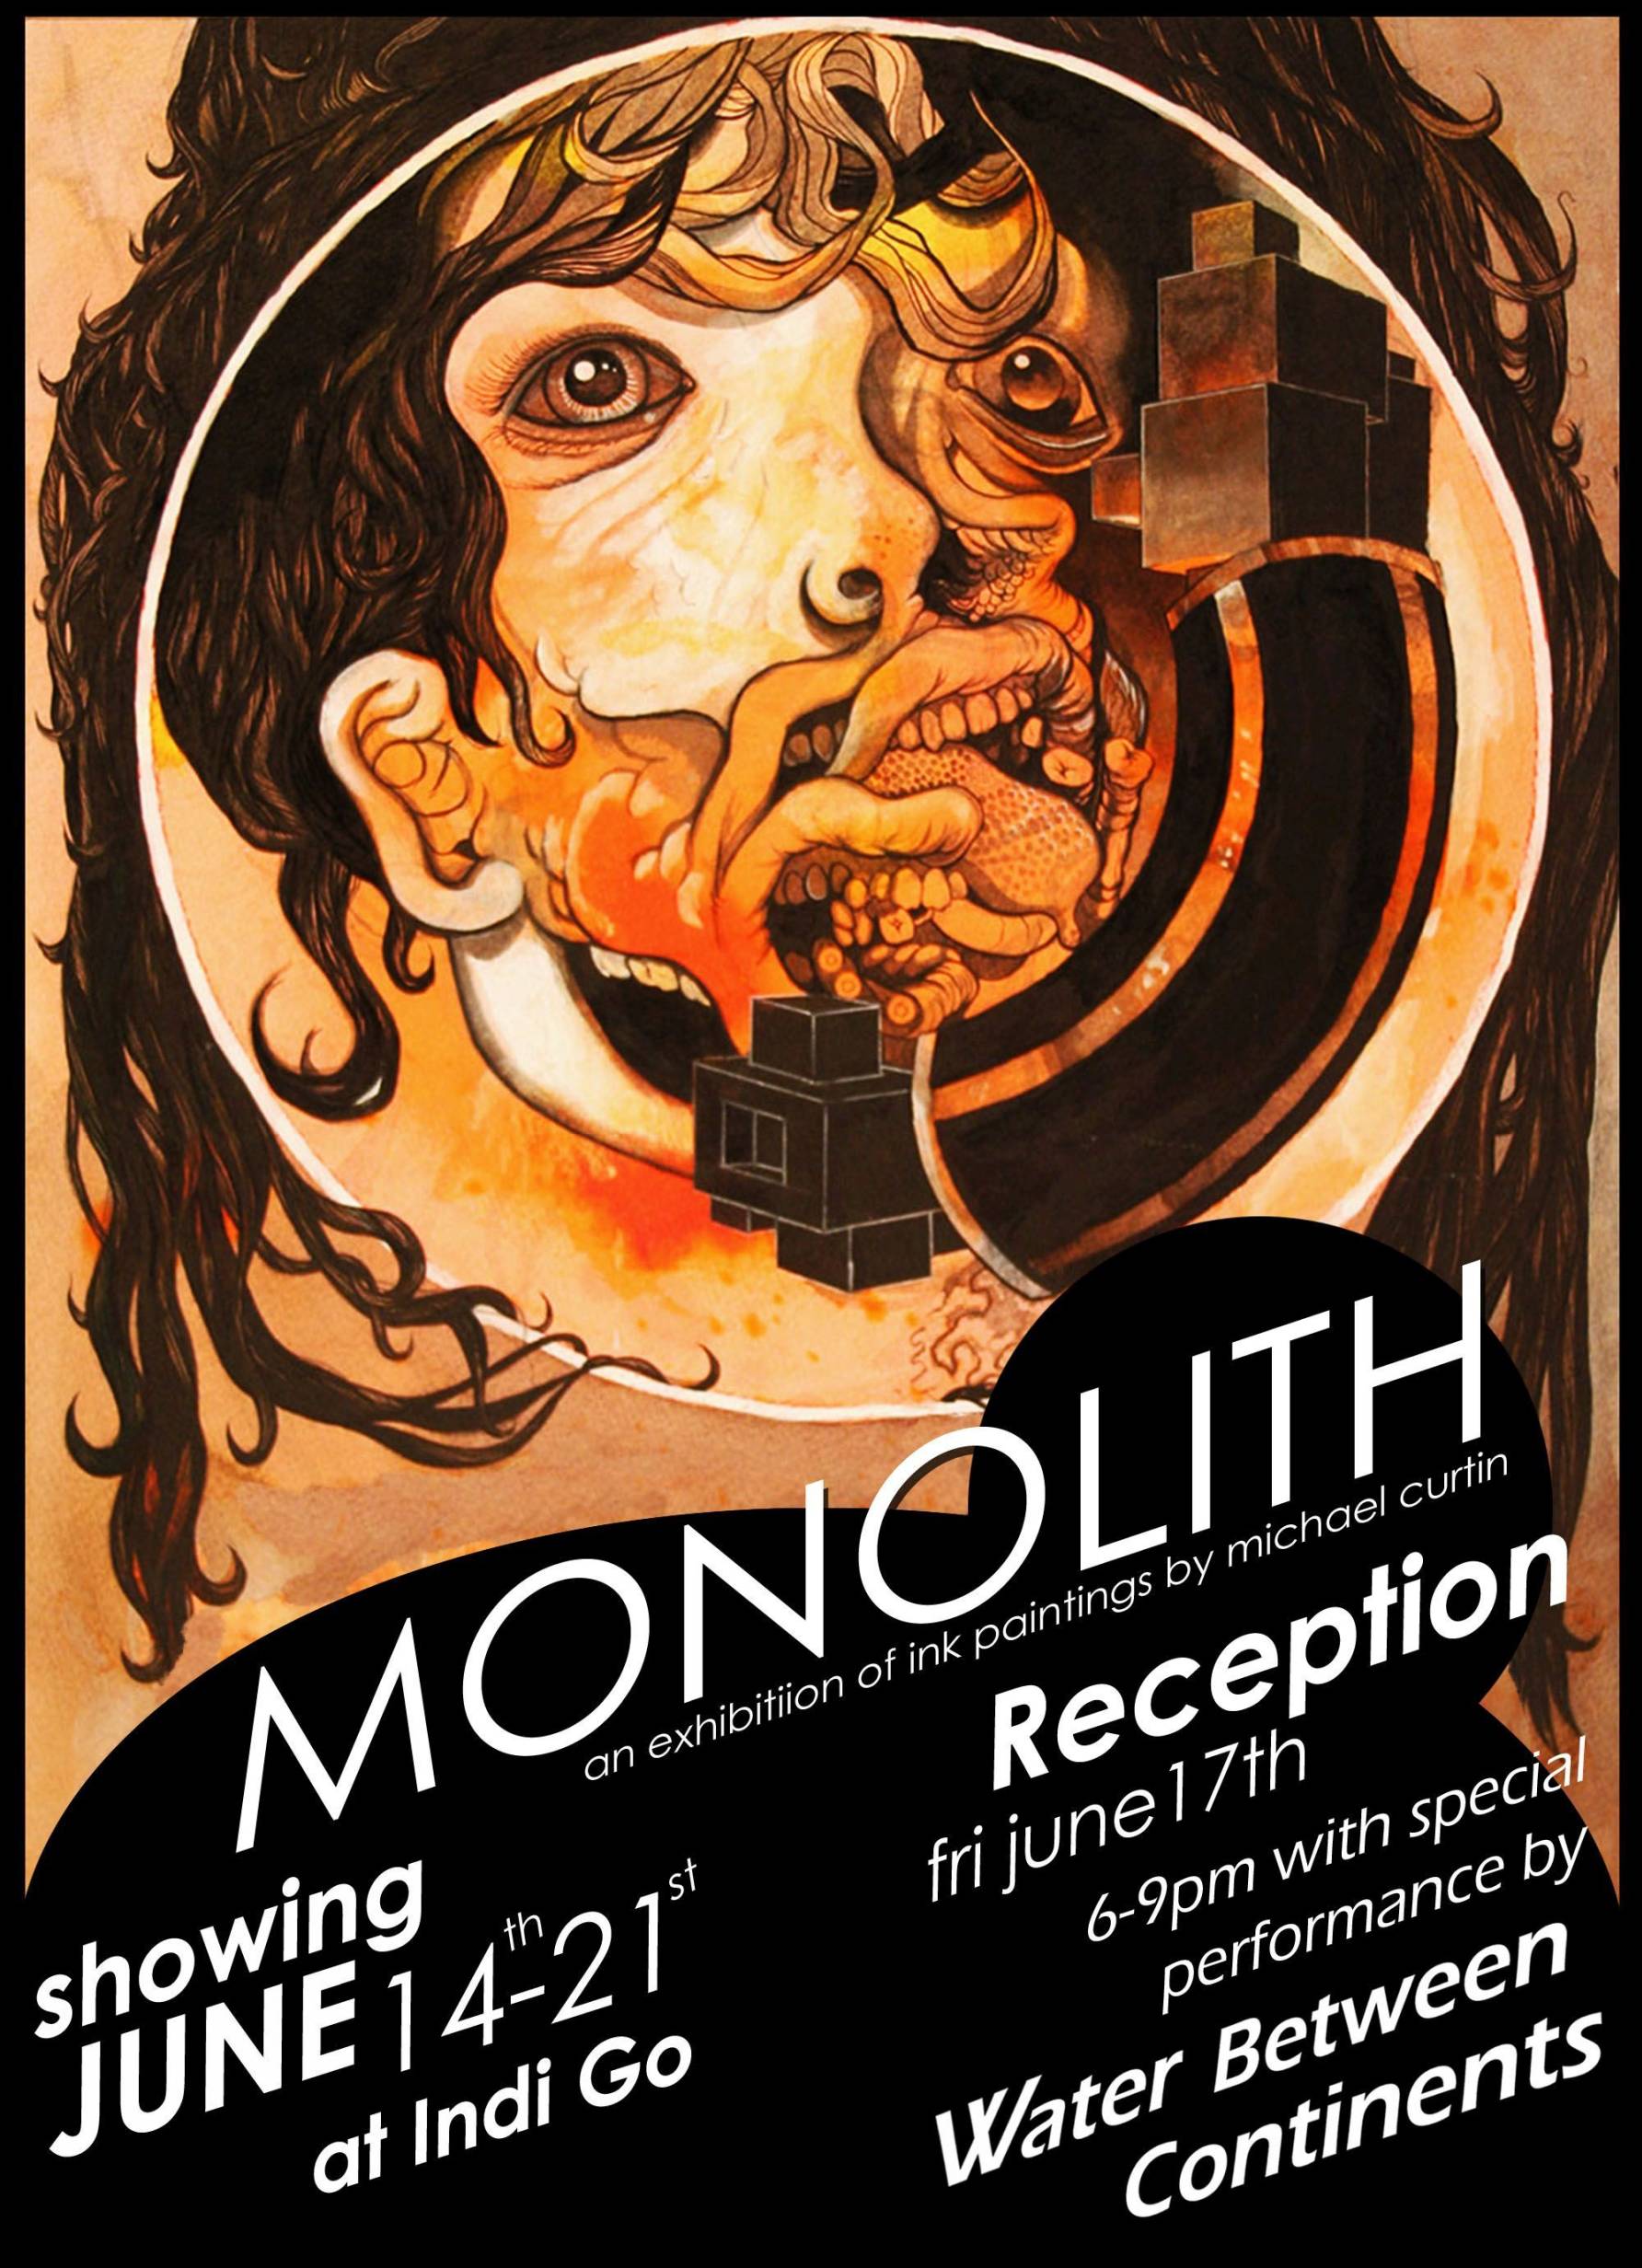 Michael Curtin’s Monolith opens this week